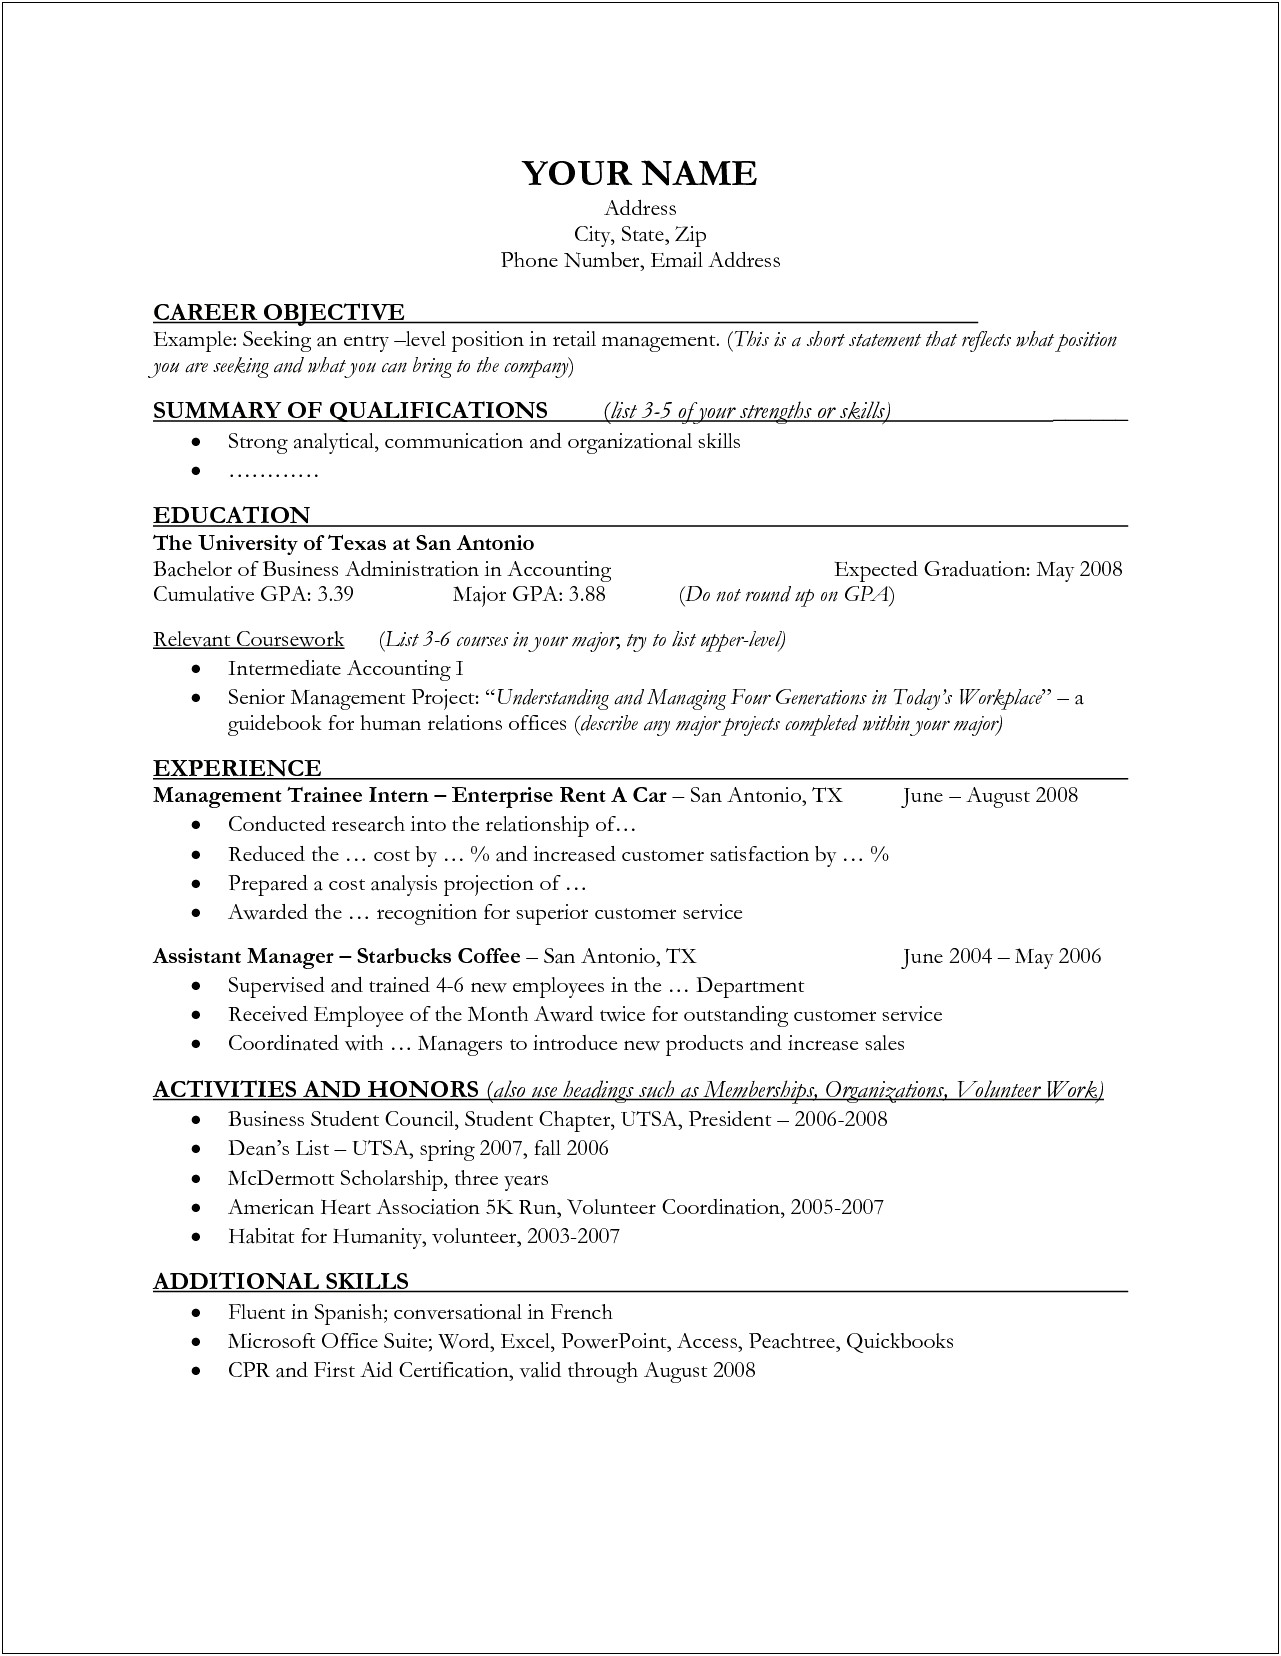 Objective Section Of Resume For Retail